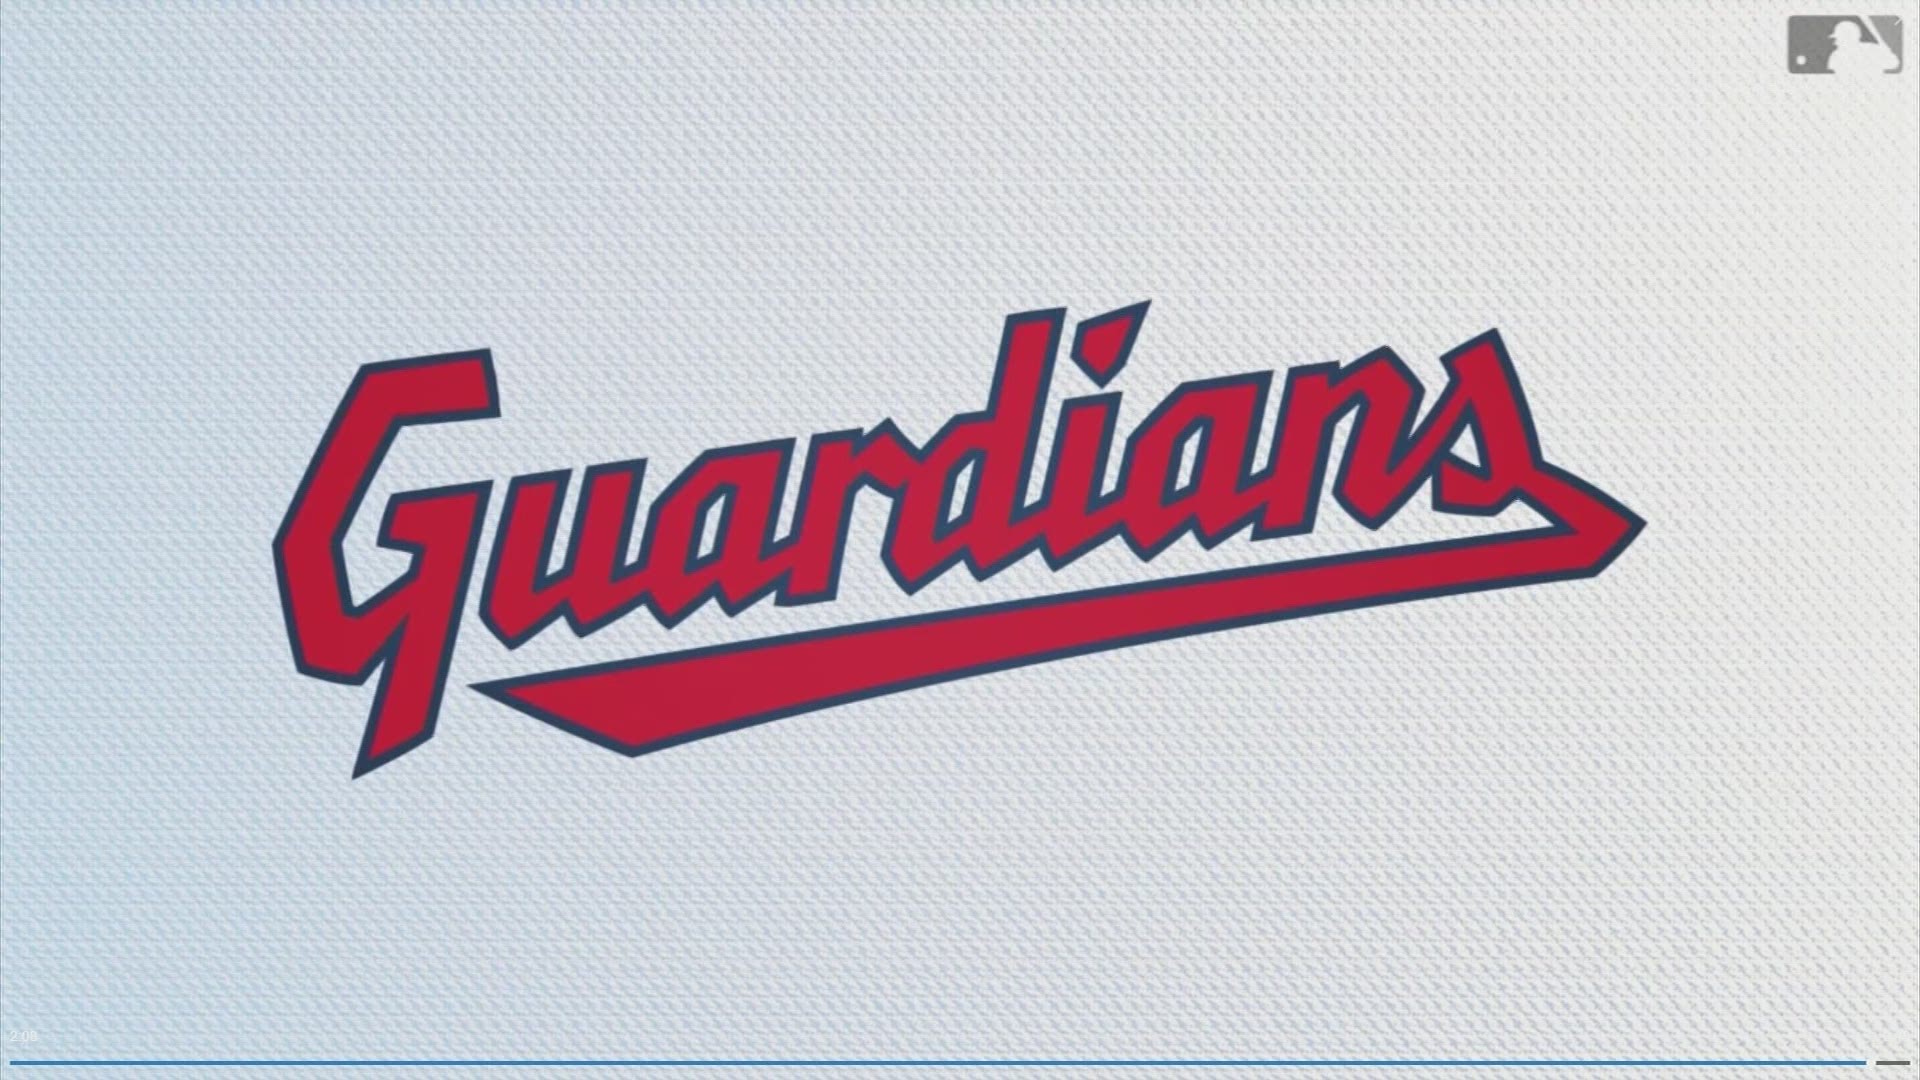 Known as the Indians since 1915, Cleveland’s Major League Baseball team will soon be called the Guardians.